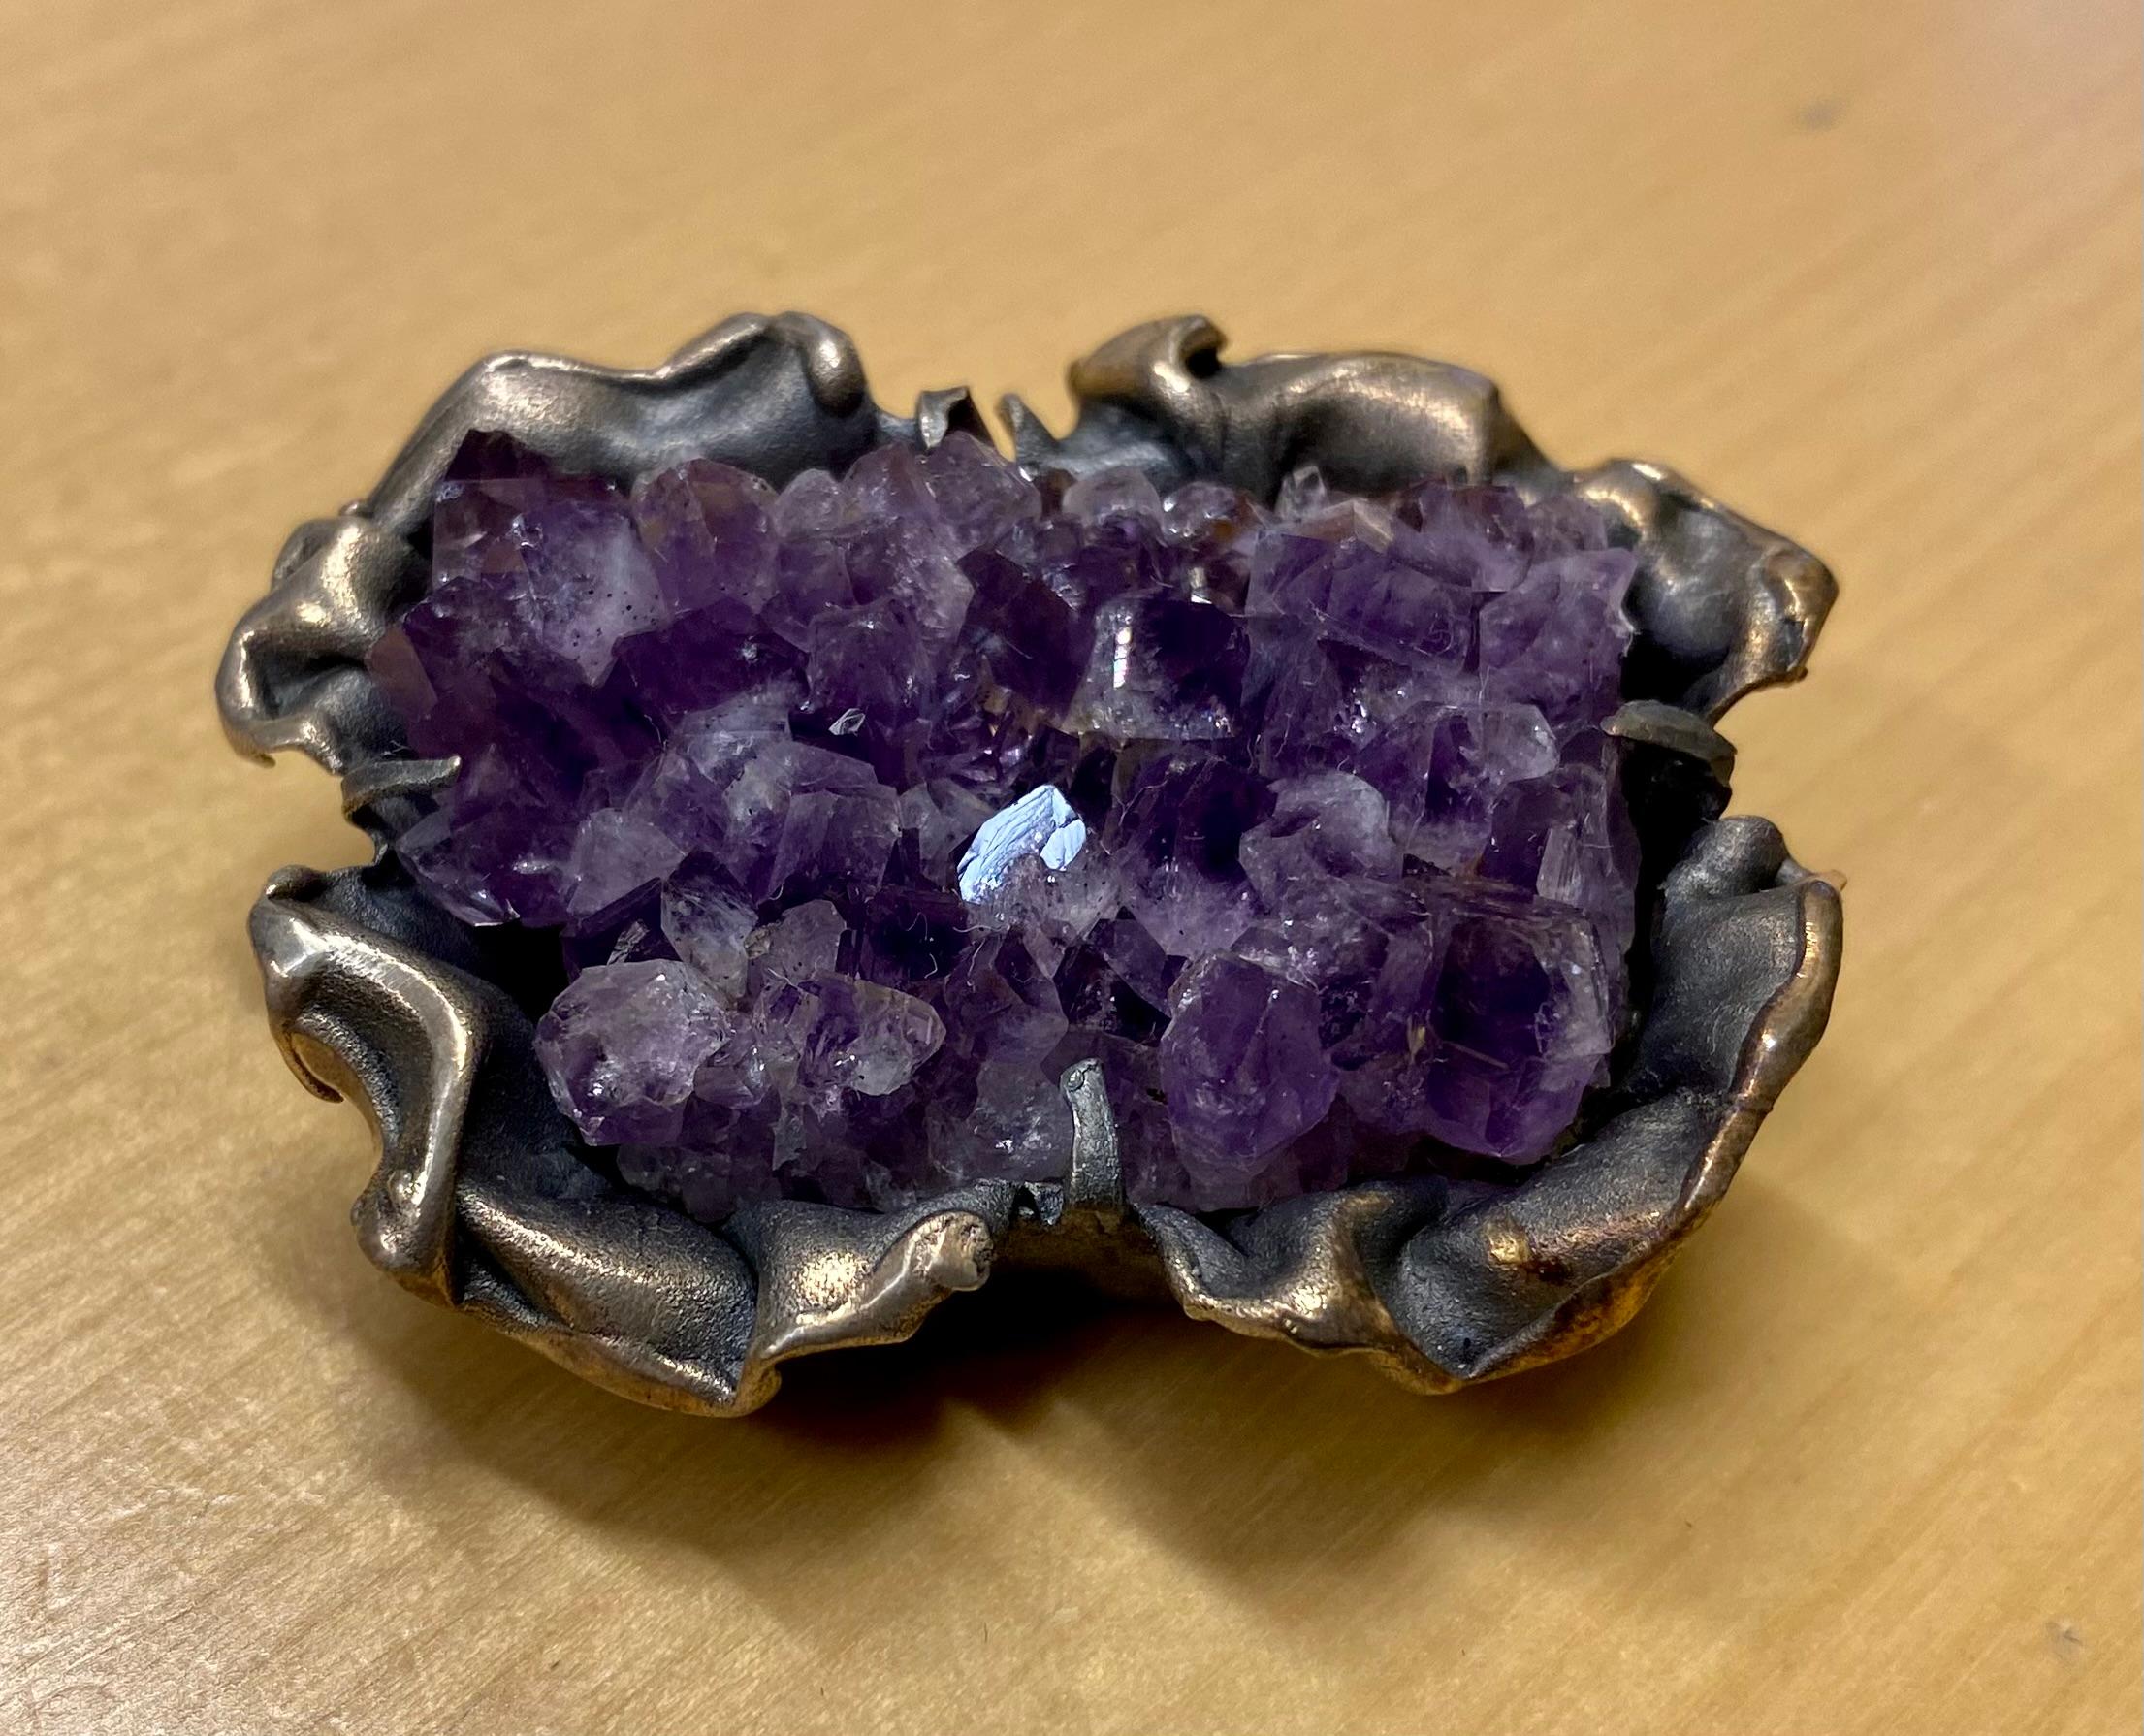 A silver brooch designed by Reino Saastamoinen.

Age: Vintage

From: 1972

Material: Silver

Sterling Silver 925

Stone: Amethyst

Designer: Reino Saastamoinen